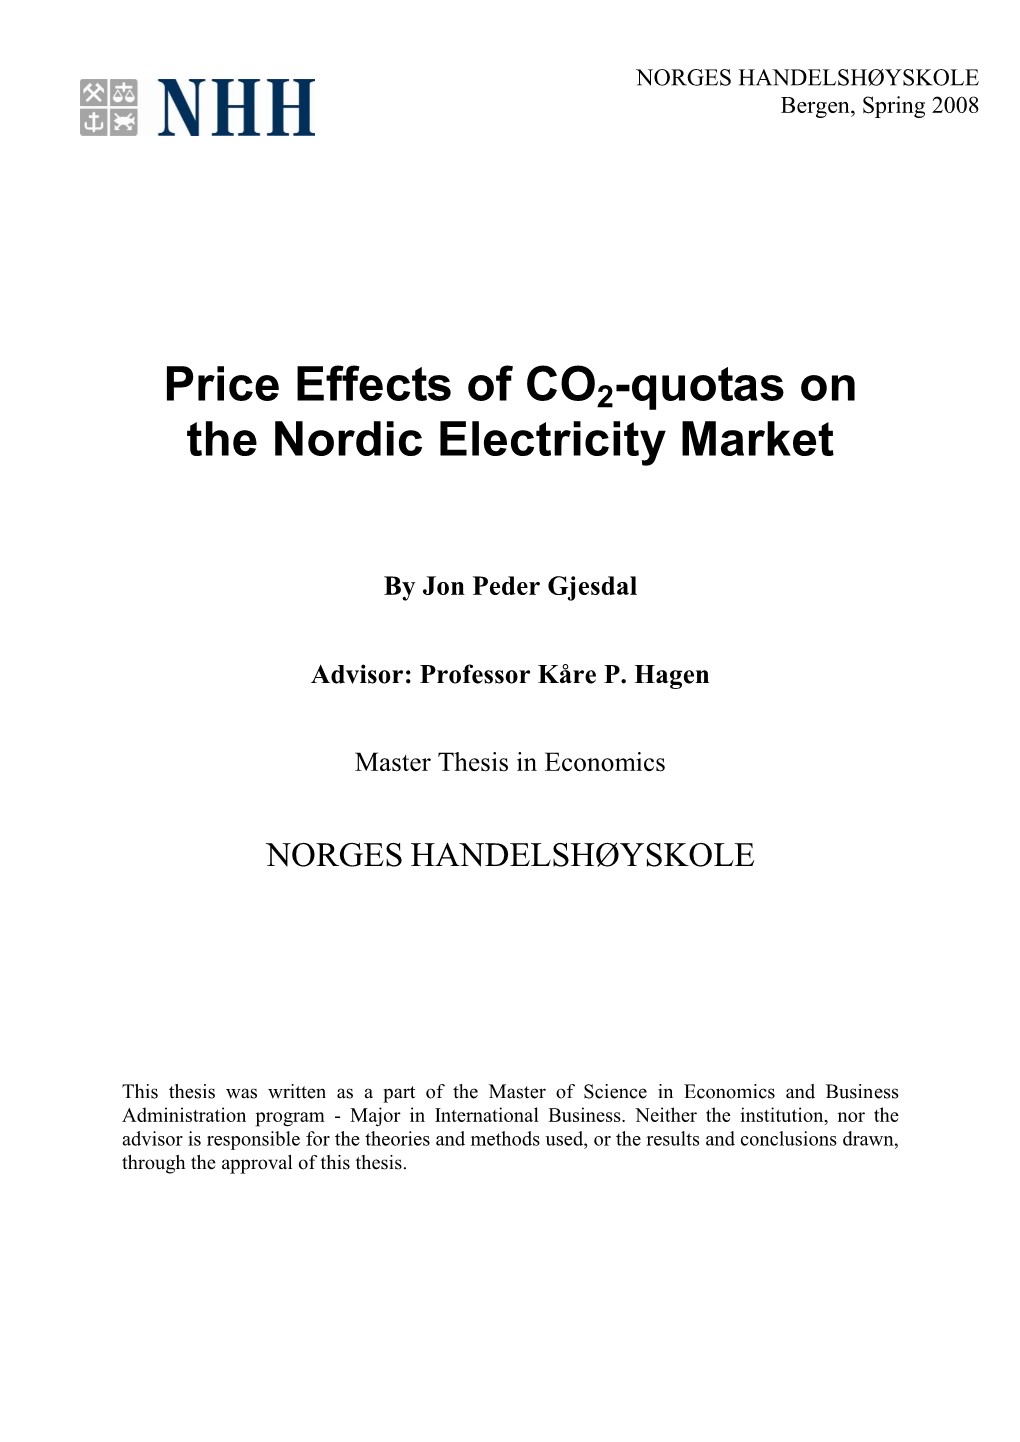 Price Effects of CO2-Quotas on the Nordic Electricity Market